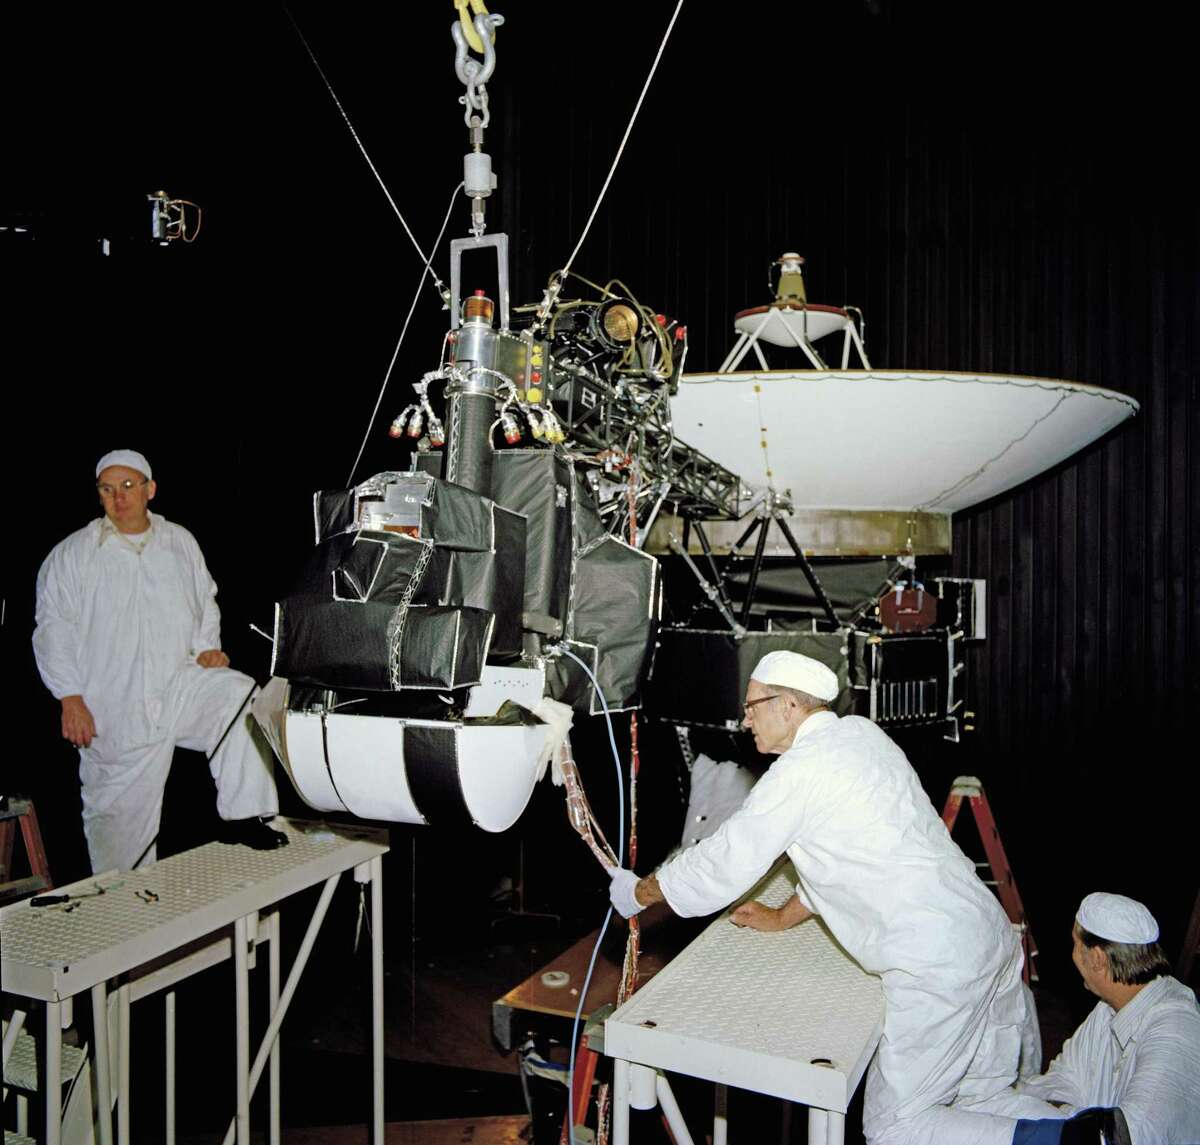 This image shows one of the Voyagers in the 25-foot space simulator chamber at NASA's Jet Propulsion Laboratory in Pasadena, California. The photo is dated April 27, 1977.